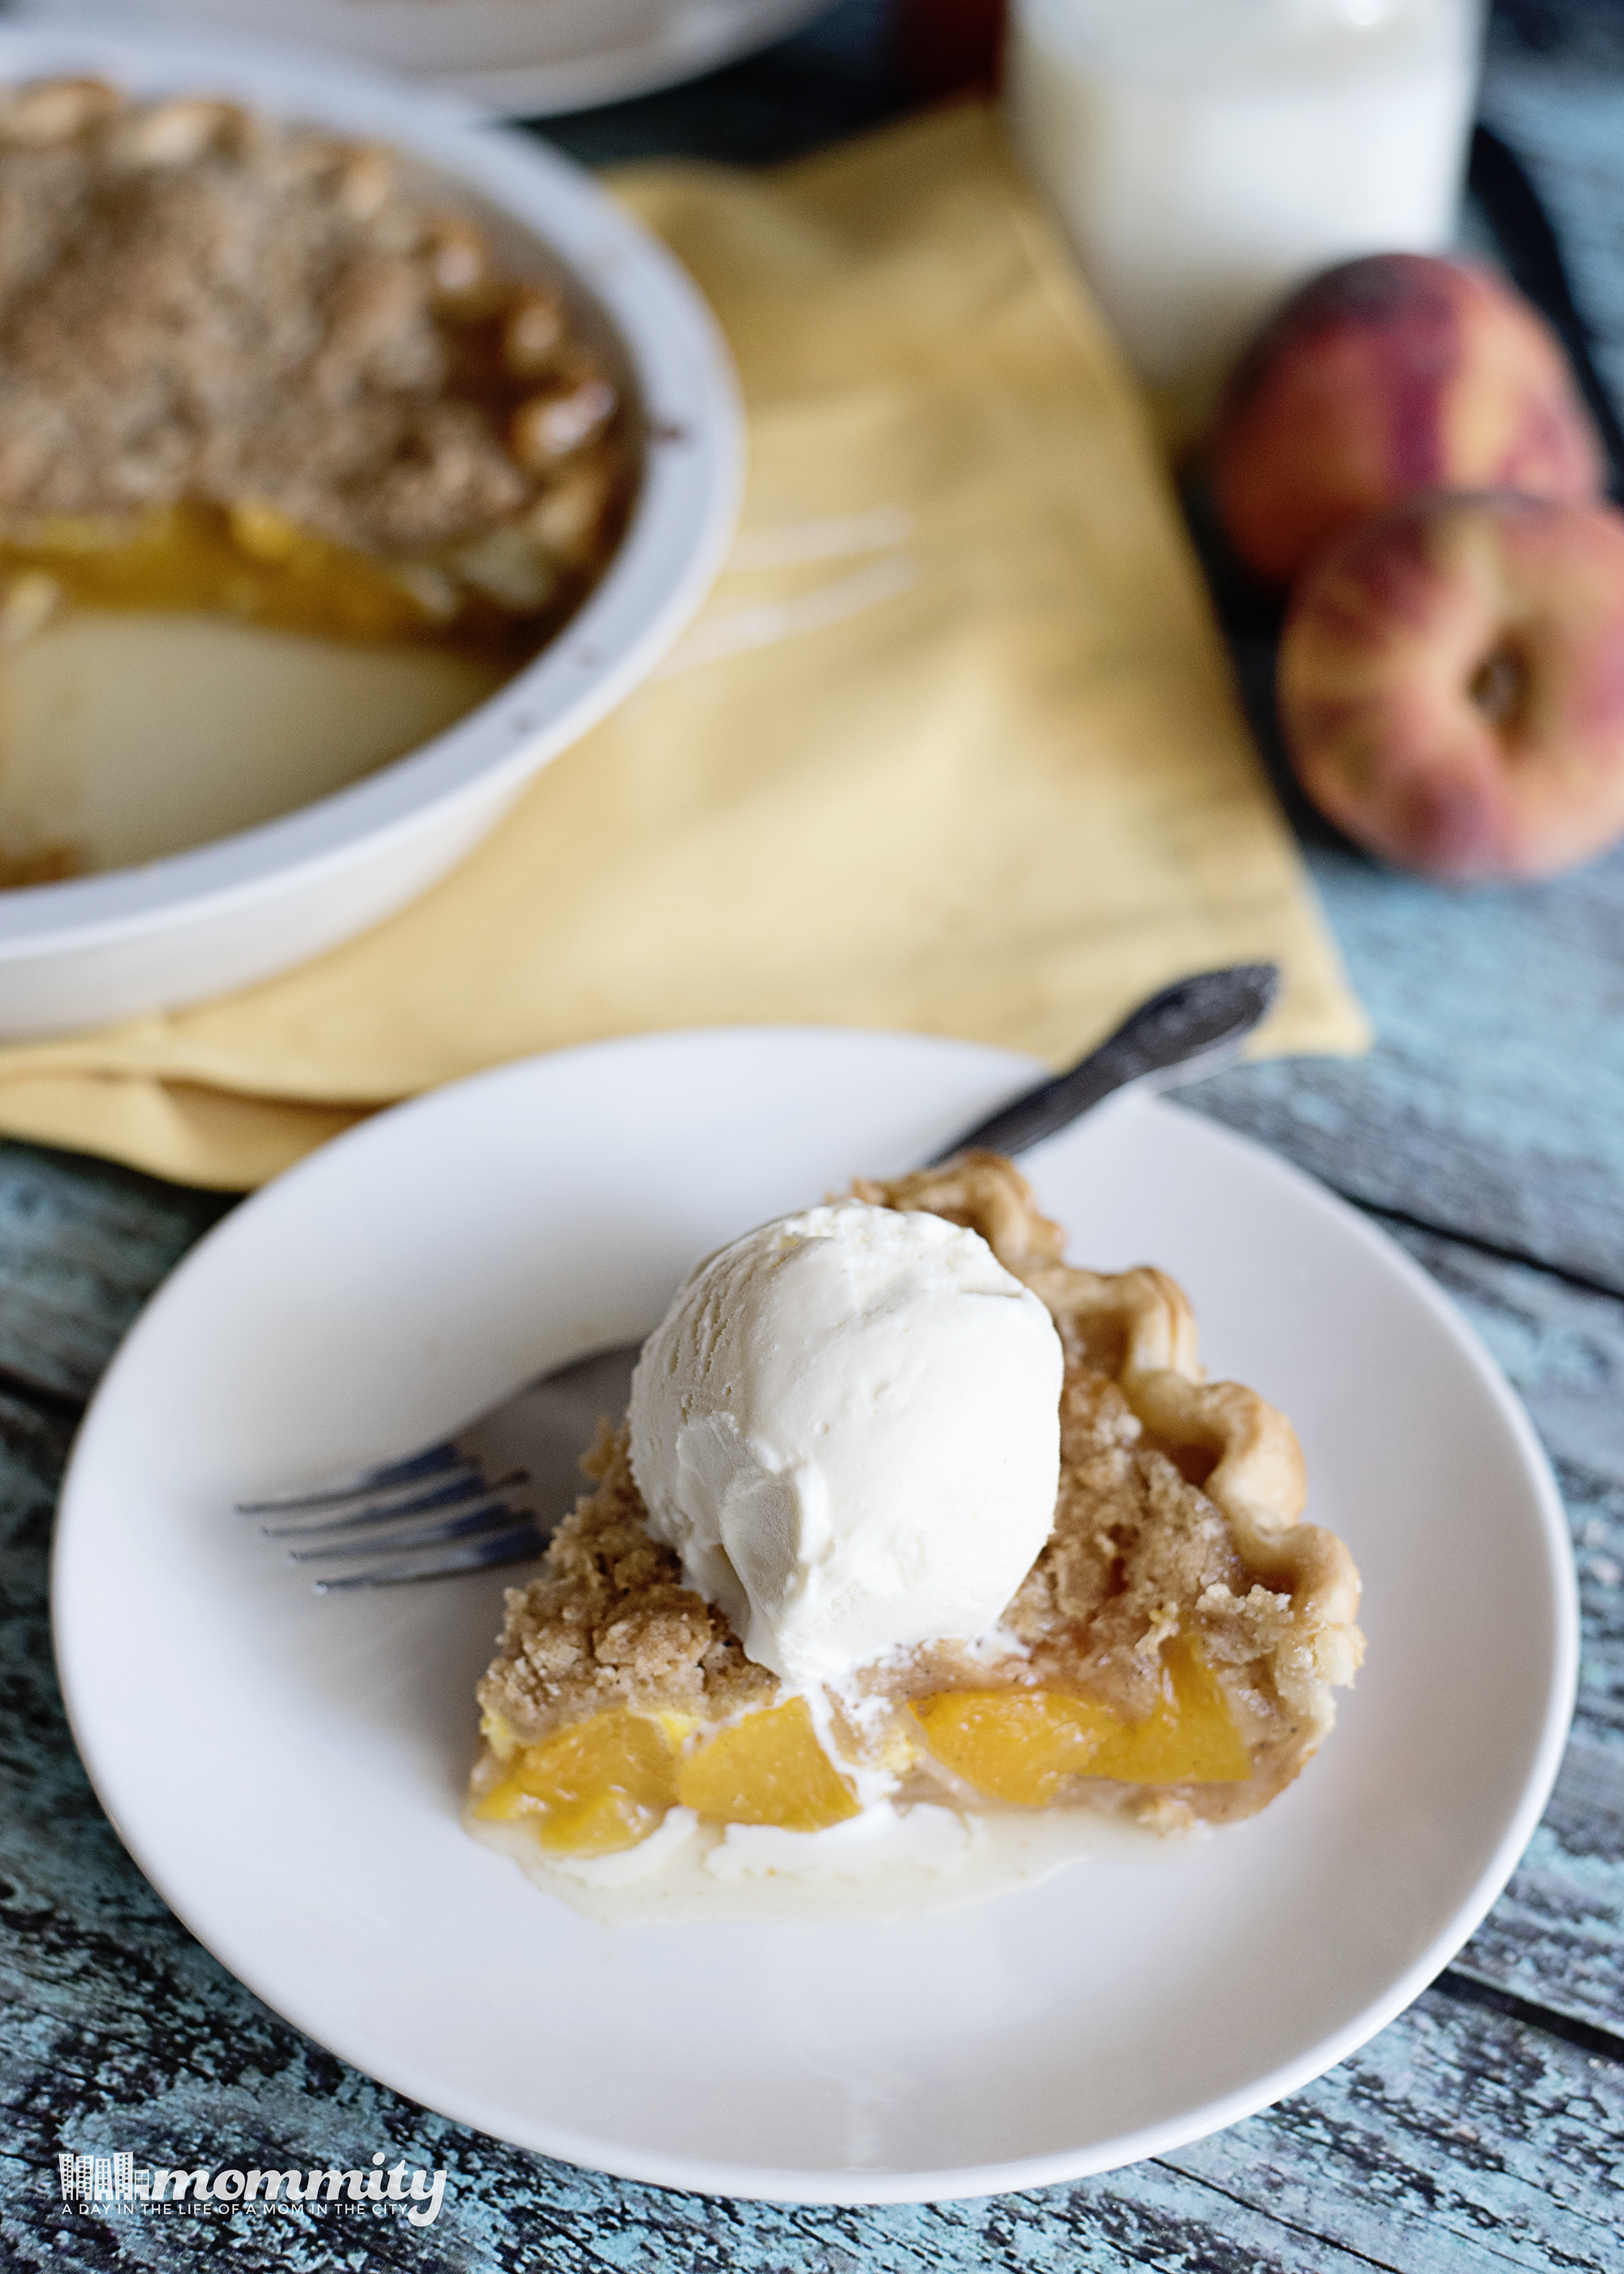 Delicious Peach Crumble Pie Recipe with Brown Sugar Topping